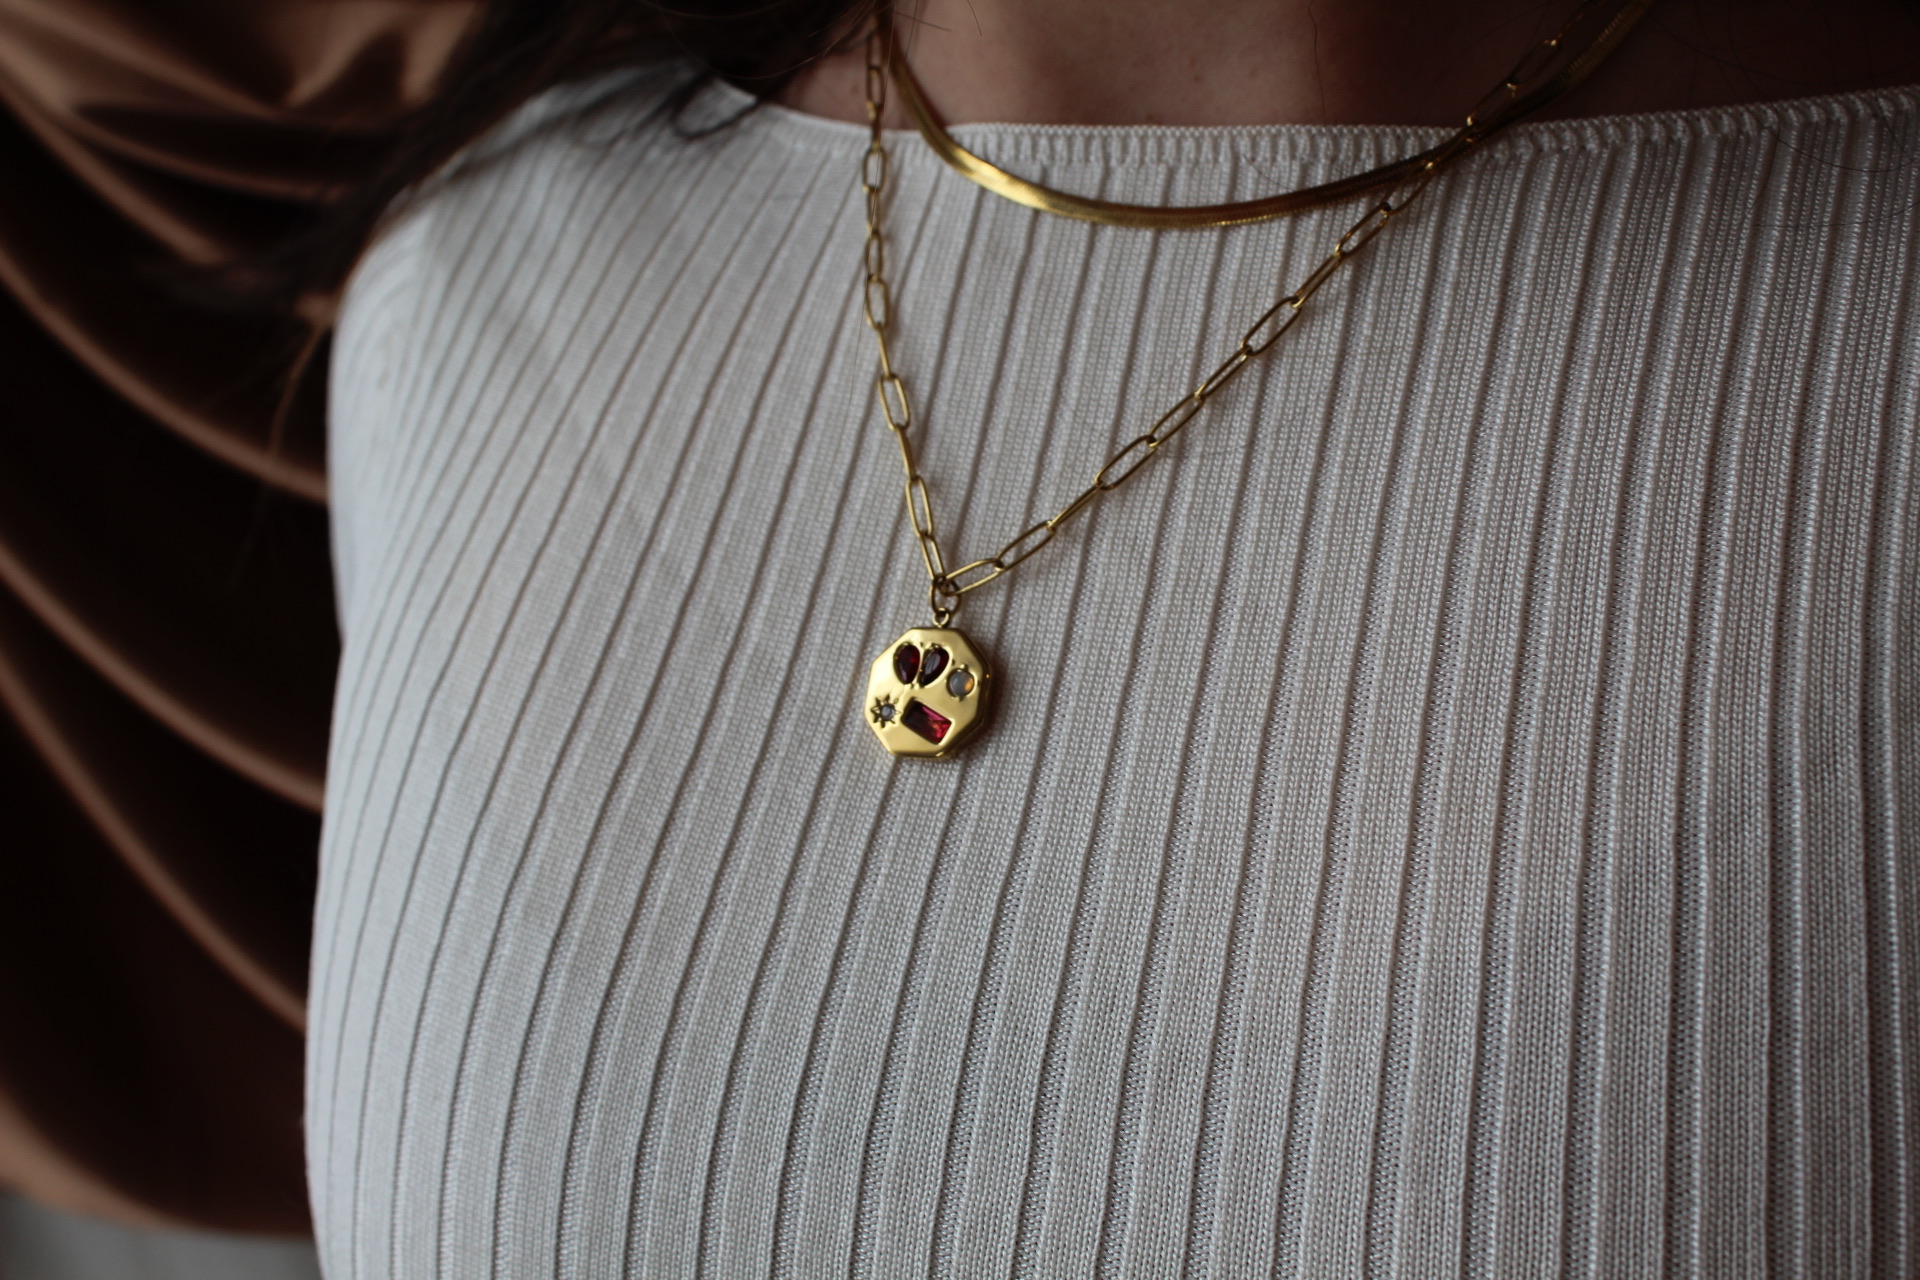 Millie The Label, a jewelry business owned by Ohio State student Natalie Milligan, recently put out its Valentine's Day campaign, titled "To The One I Love," in which the above necklace was featured. Credit: Courtesy of Ellie Erich 